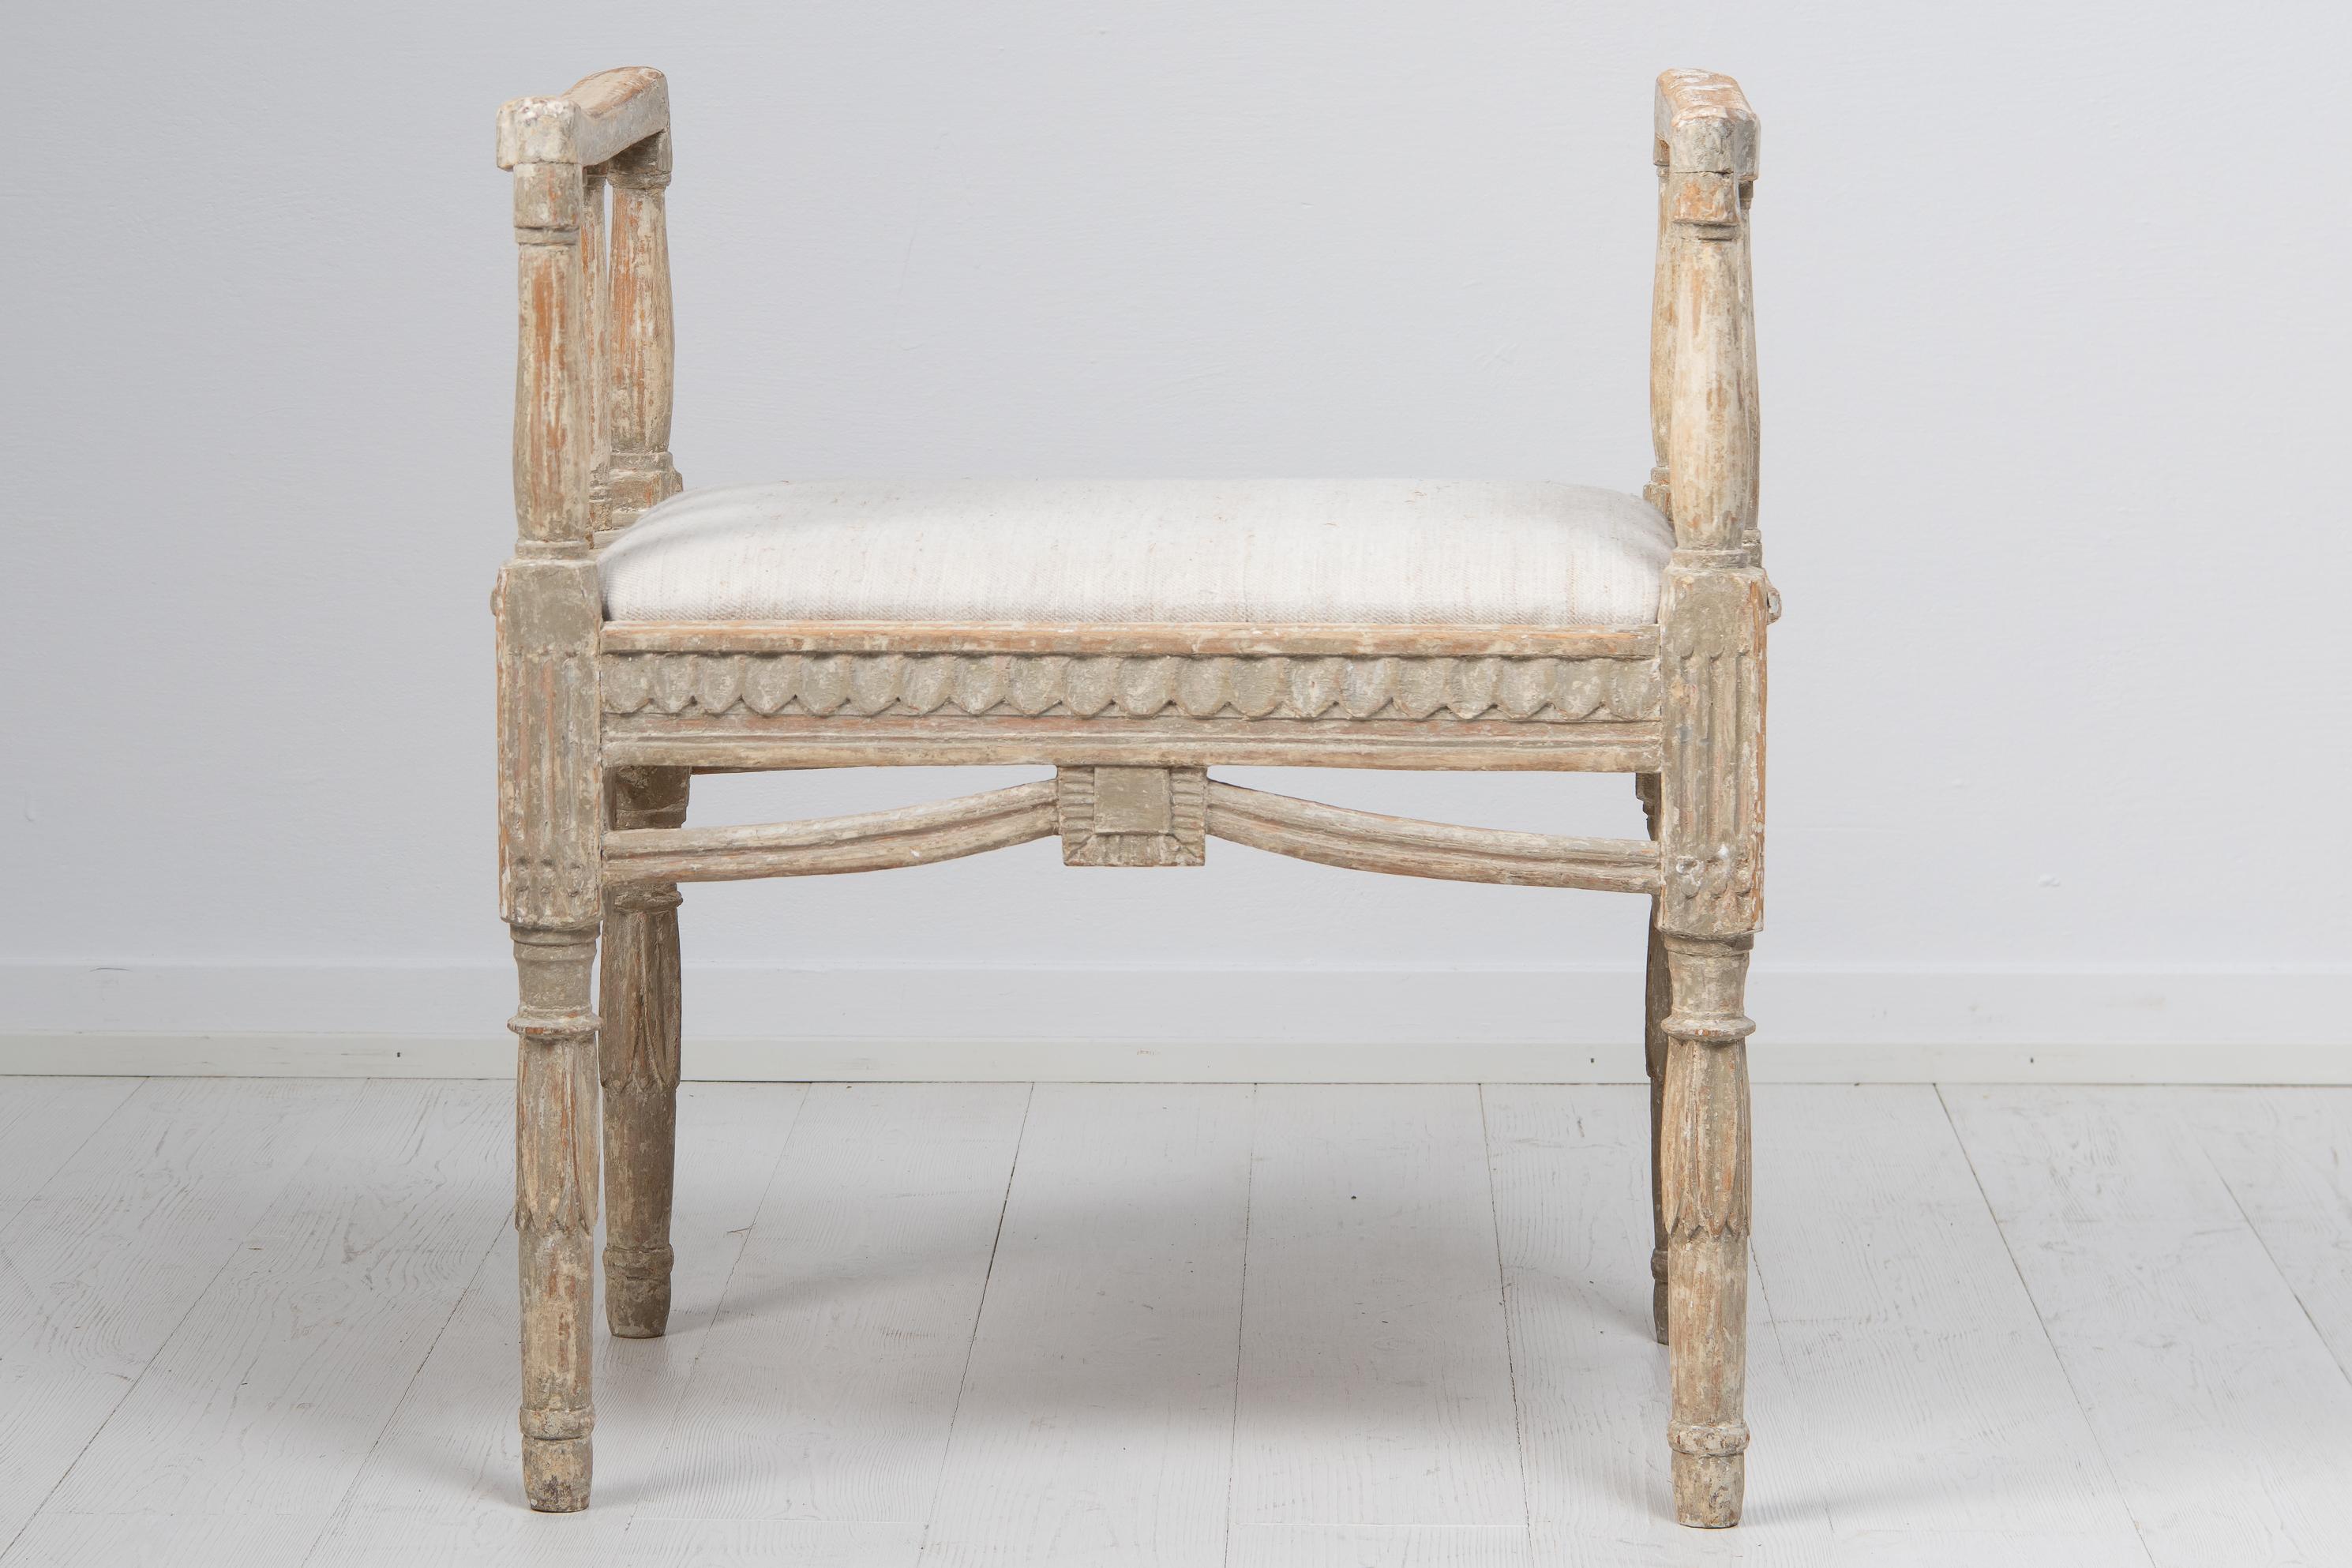 Swedish late gustavian tabouret or footstool from the years around 1790 to 1810. The tabouret is from Sweden and made in pine. This piece is made with armrests or handles on each side as well as a rich decor. The paint has been dry scraped by hand